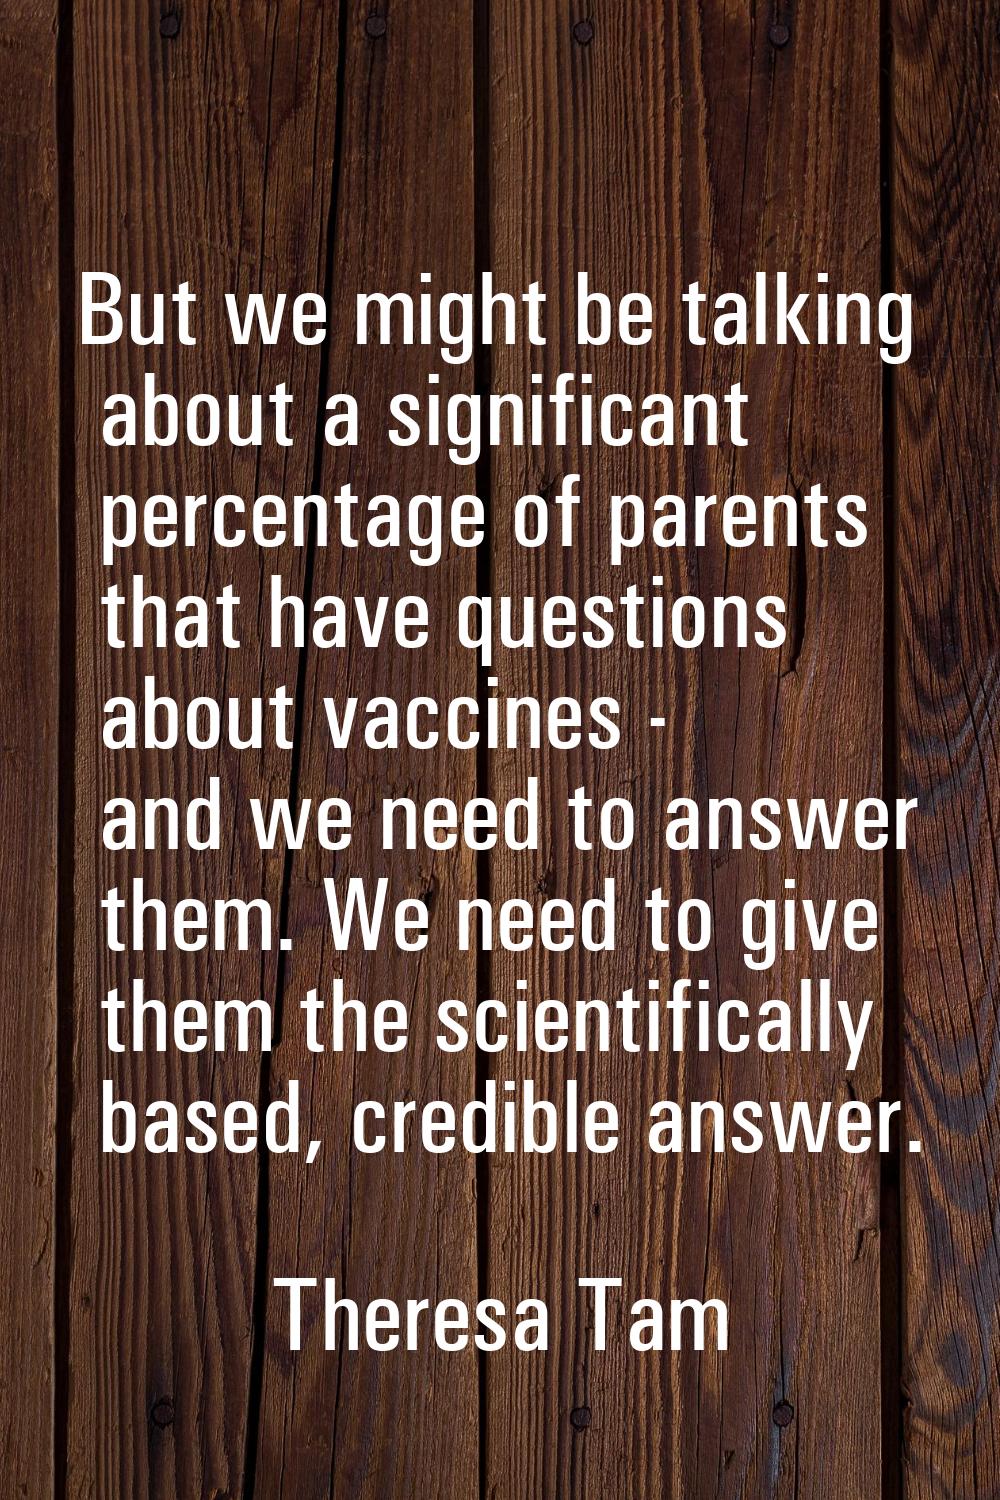 But we might be talking about a significant percentage of parents that have questions about vaccine